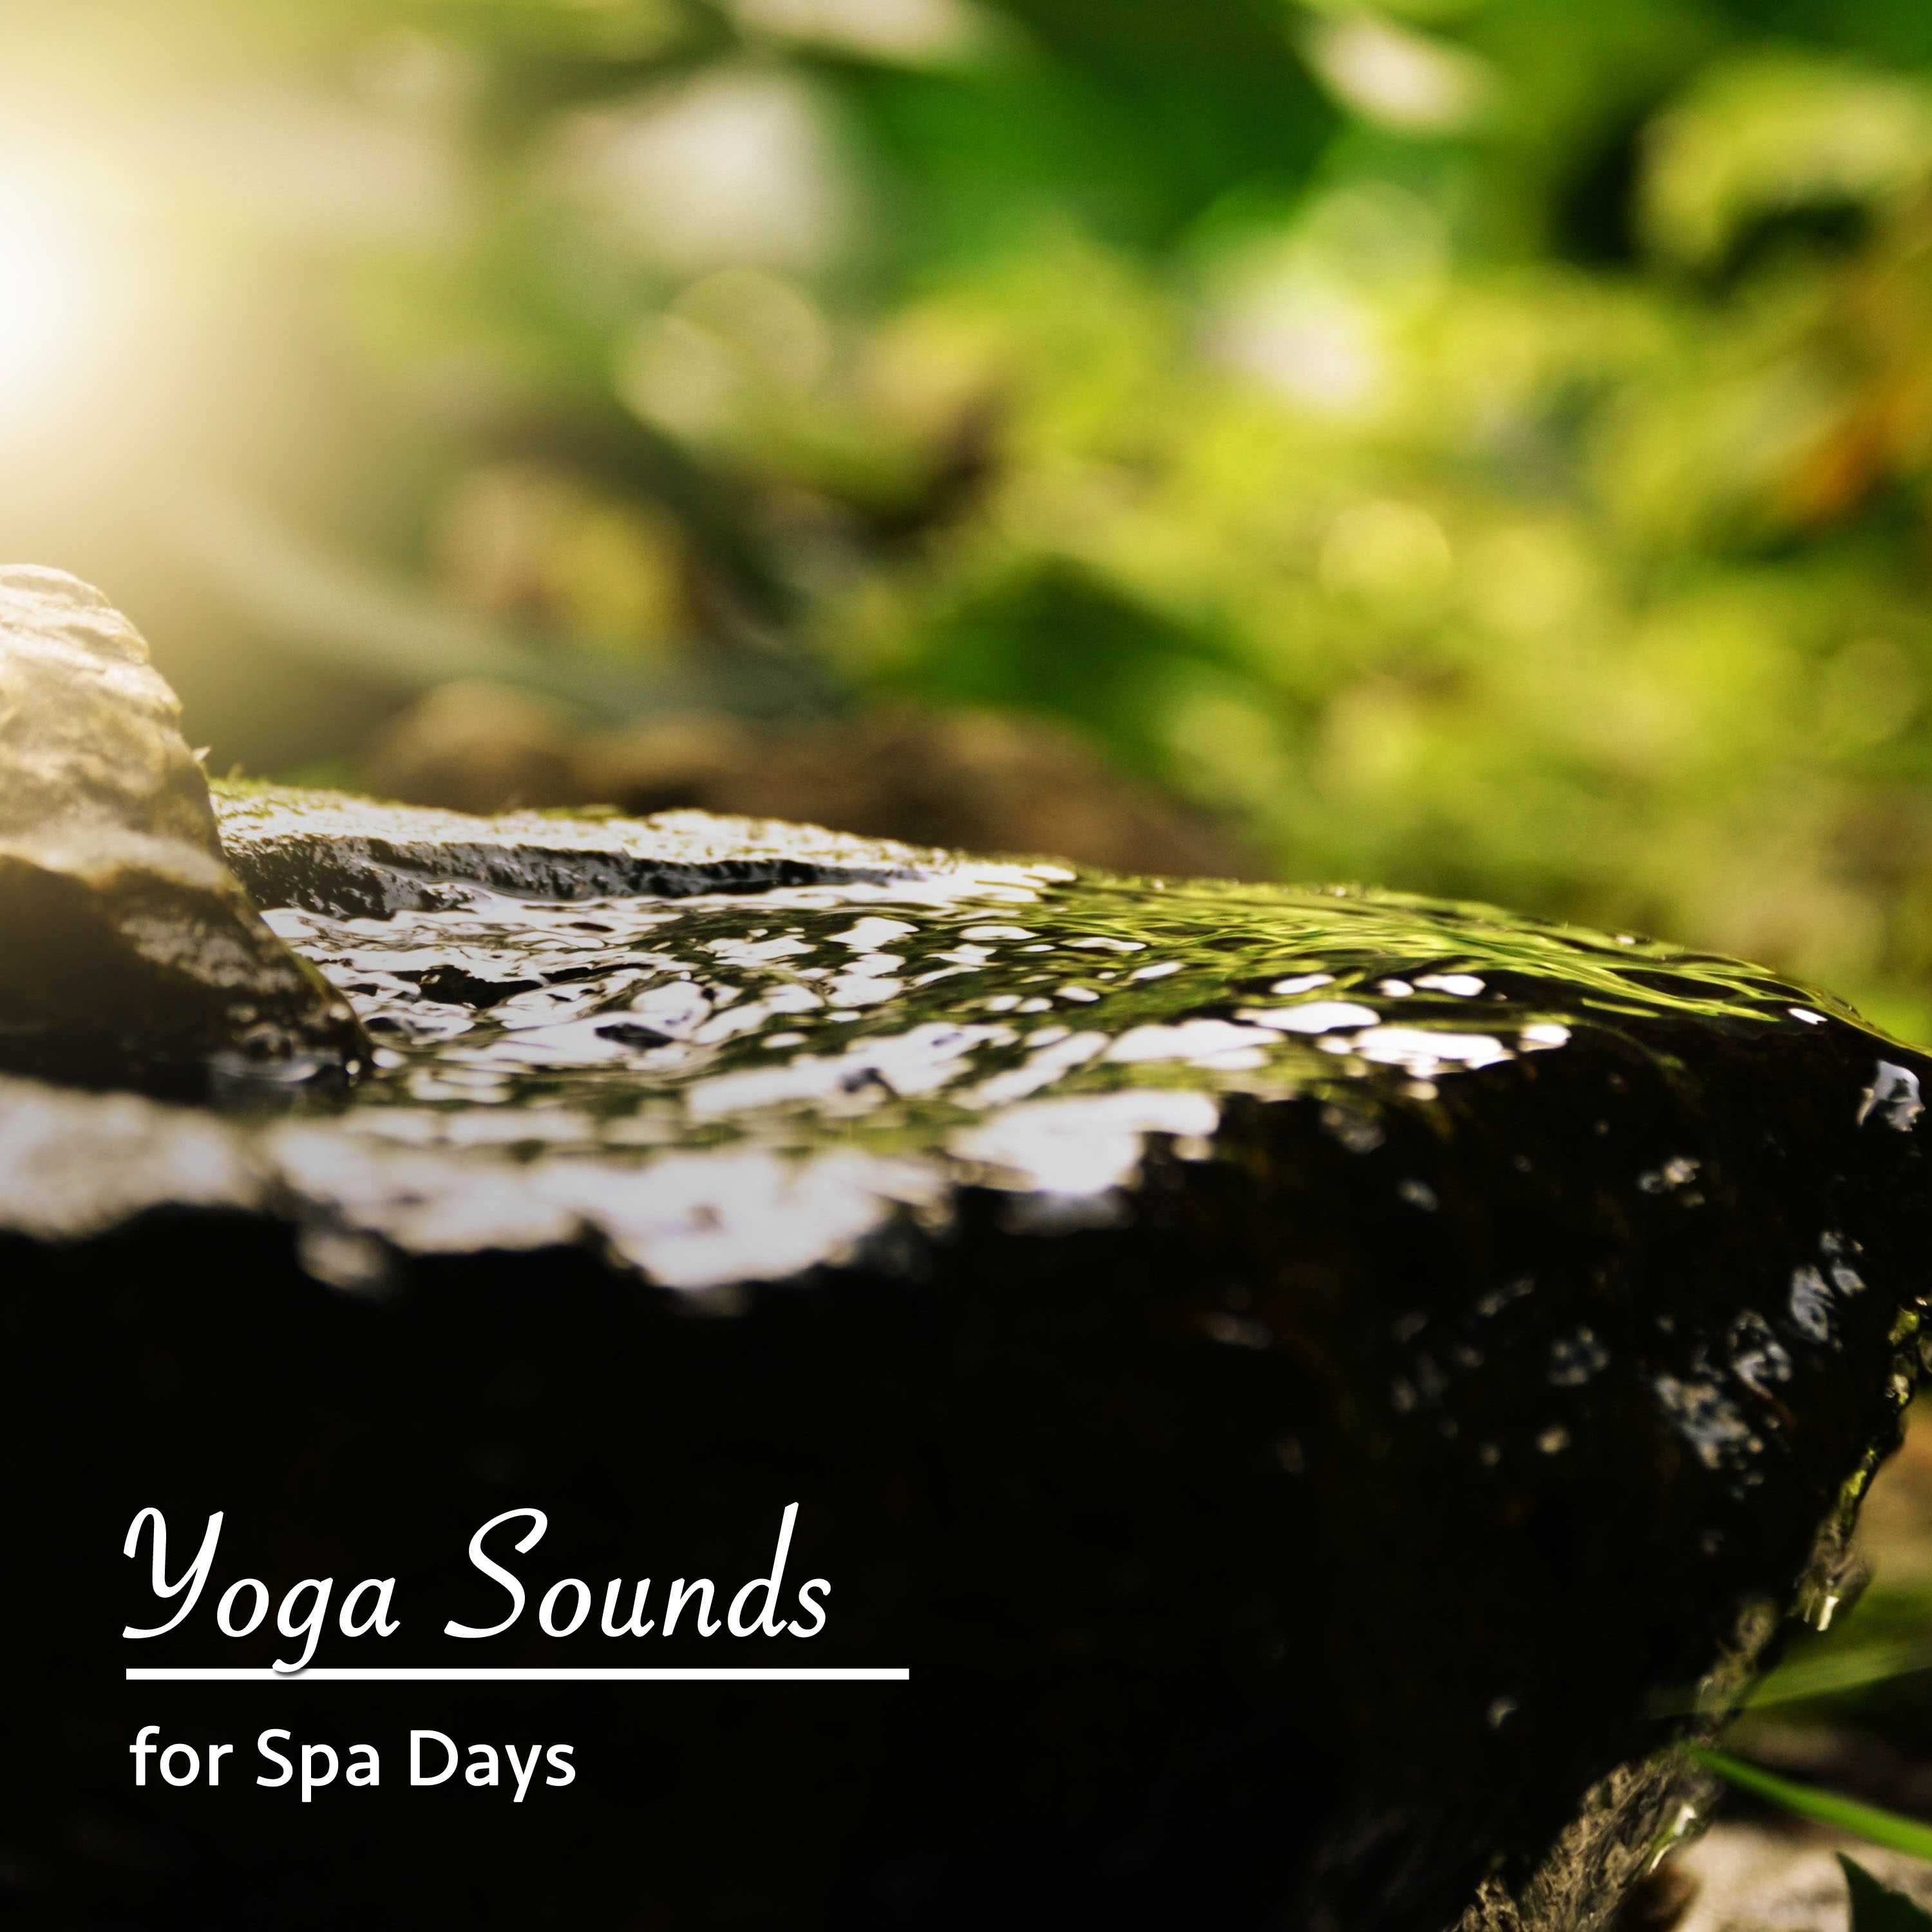 12 Yoga Sounds for Spa Days